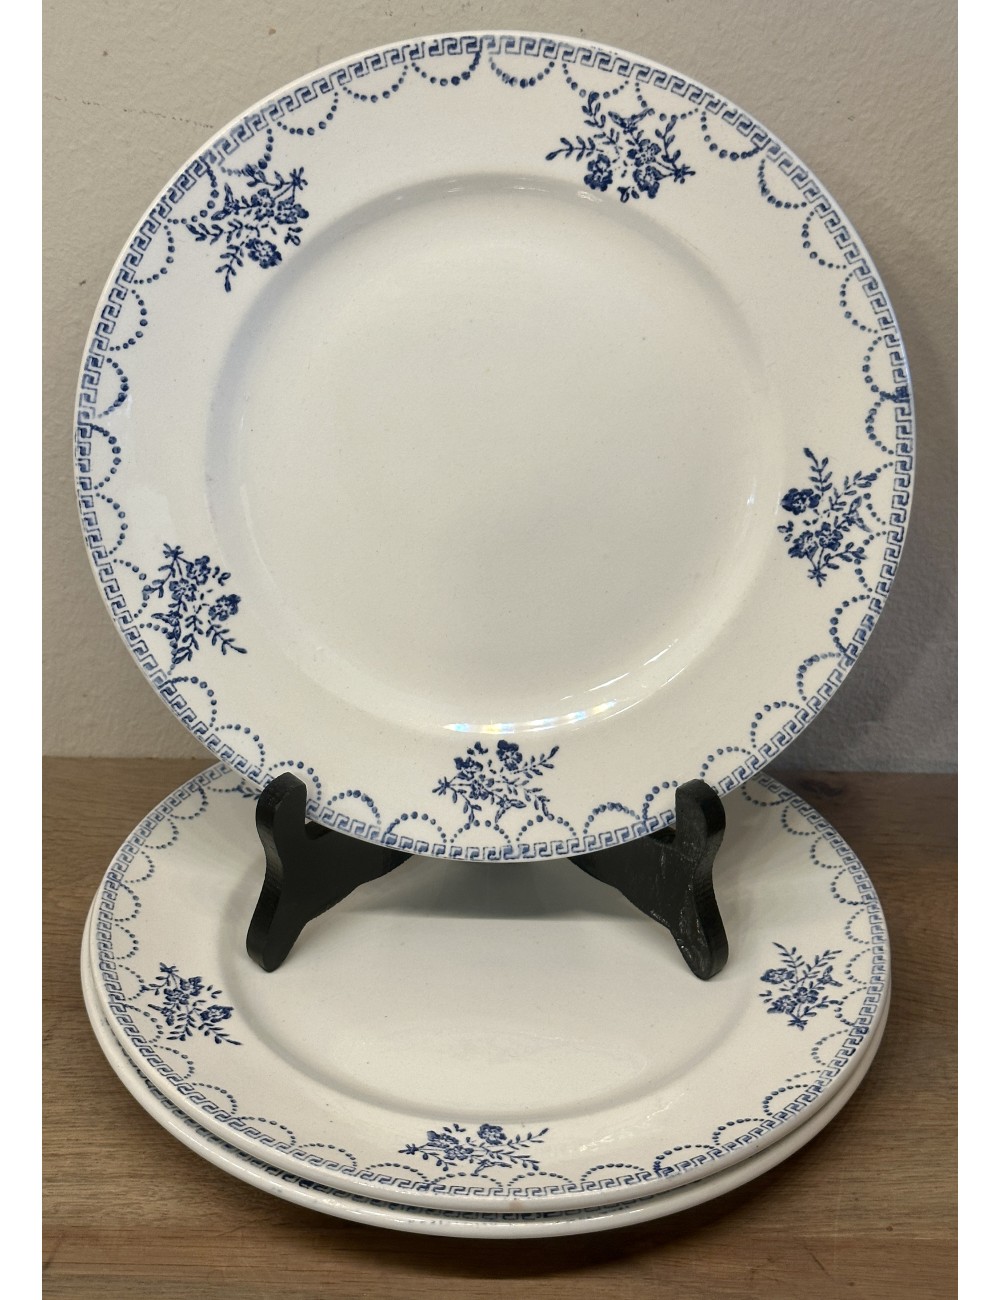 Breakfast plate / Dessert plate - St. Amand - semi vitrerie - décor with blue flowers and border decorations